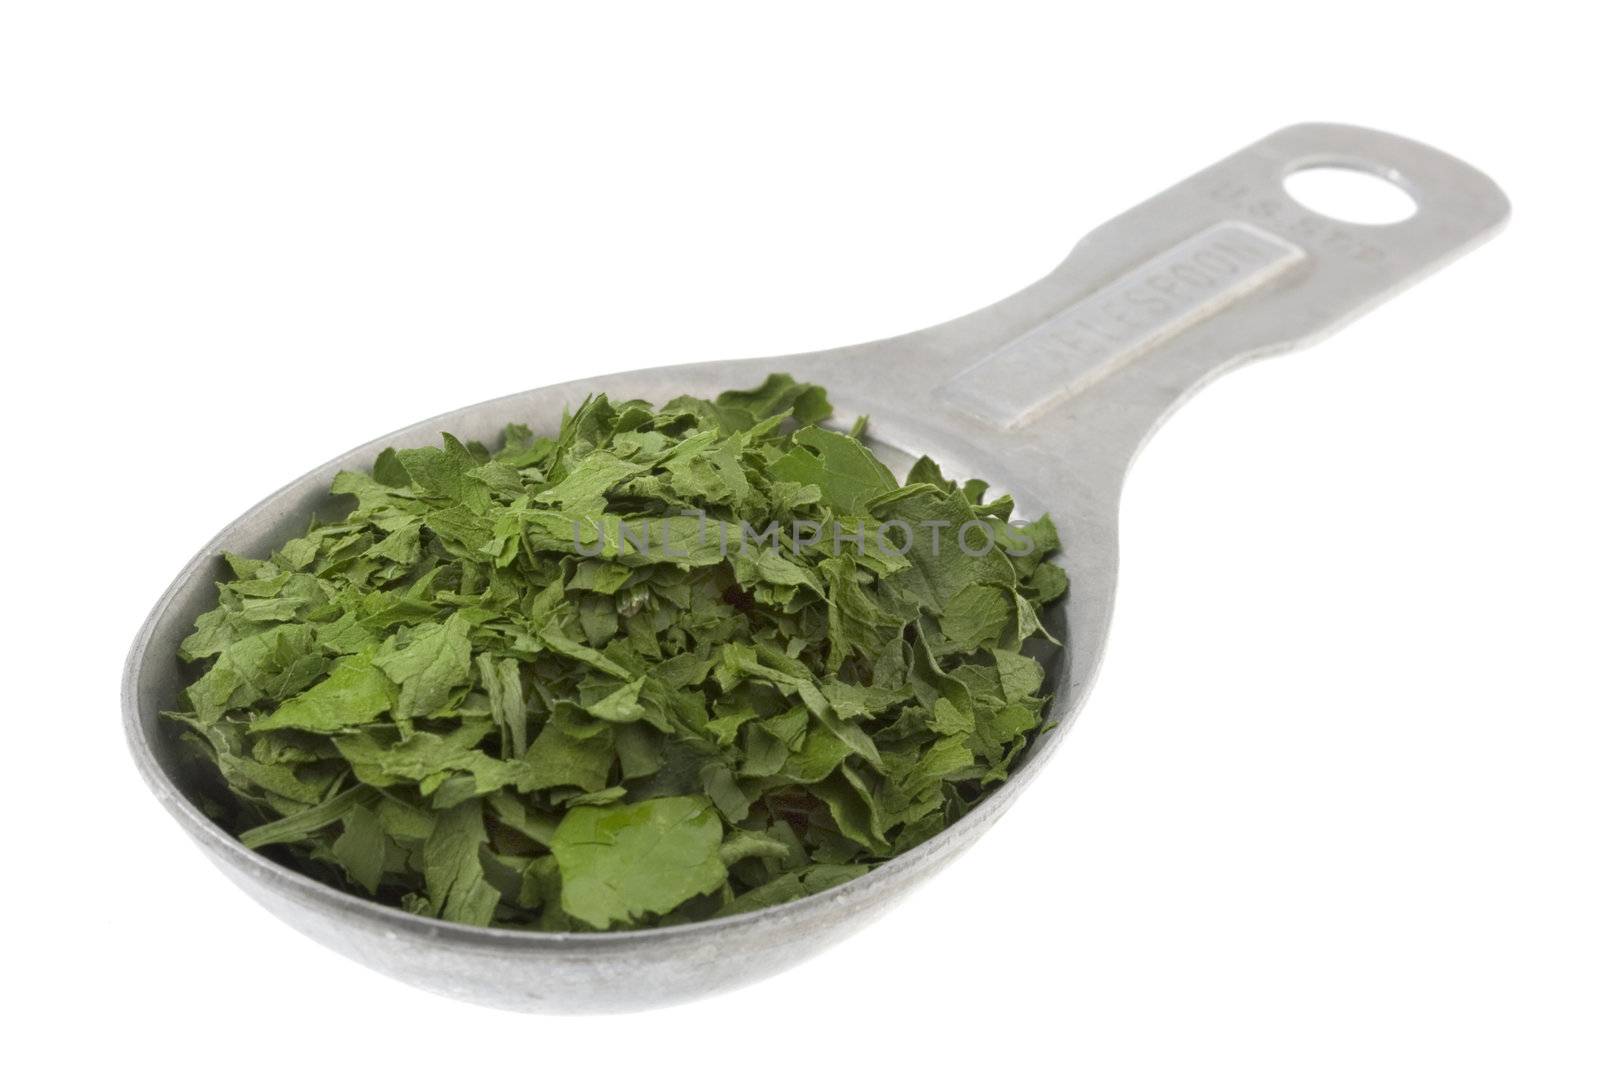 tablespoon of dried parsley  by PixelsAway